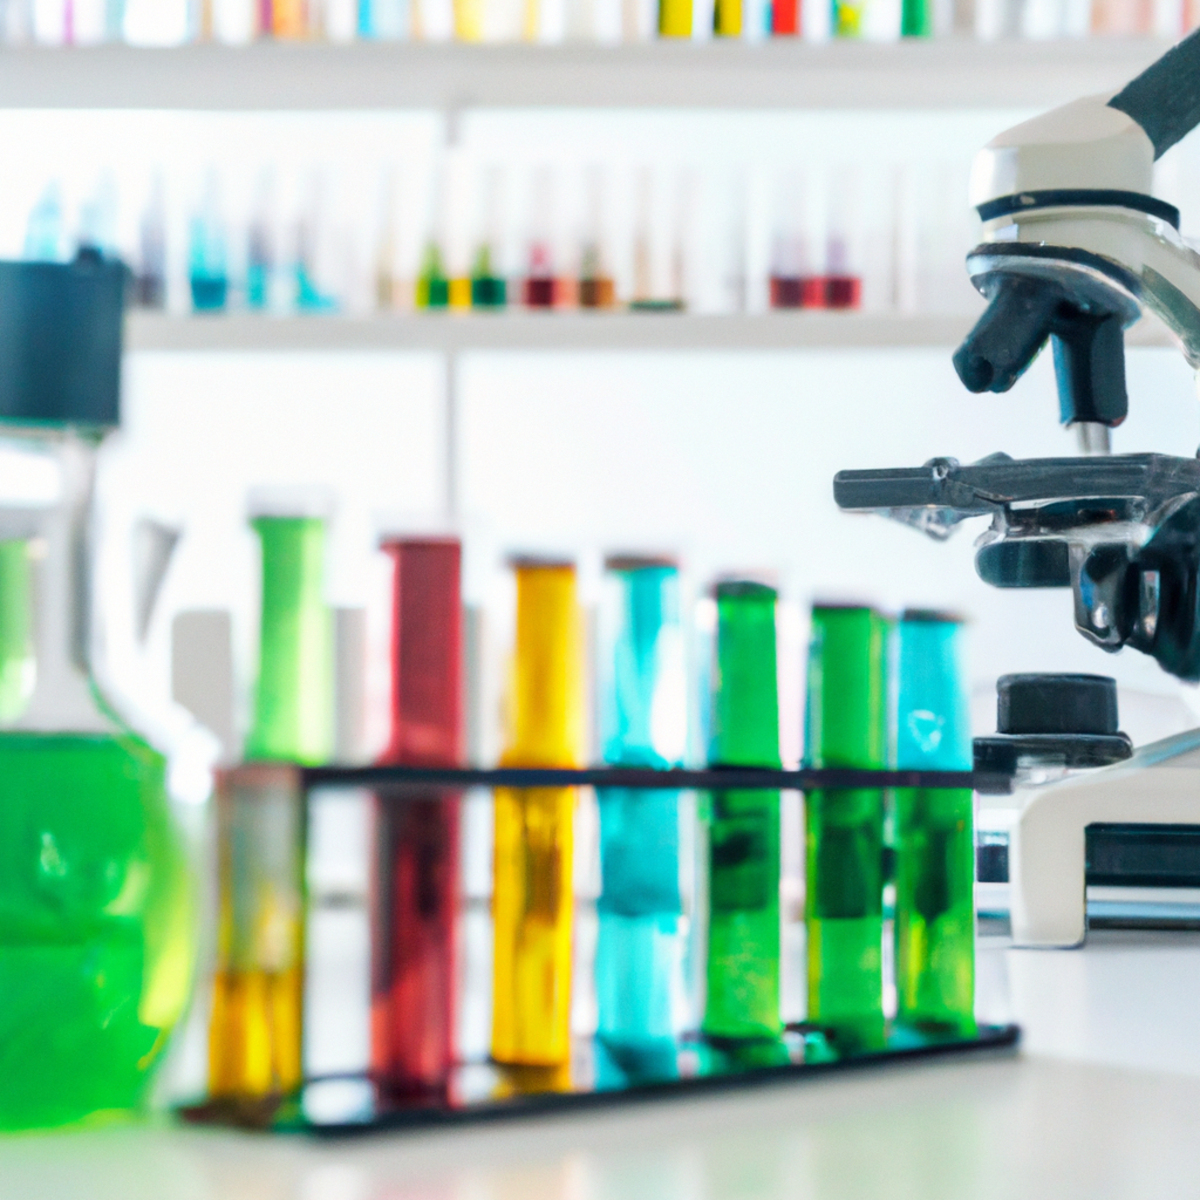 Scientific equipment and tools on a lab bench, showcasing meticulous research process and vibrant chemicals.